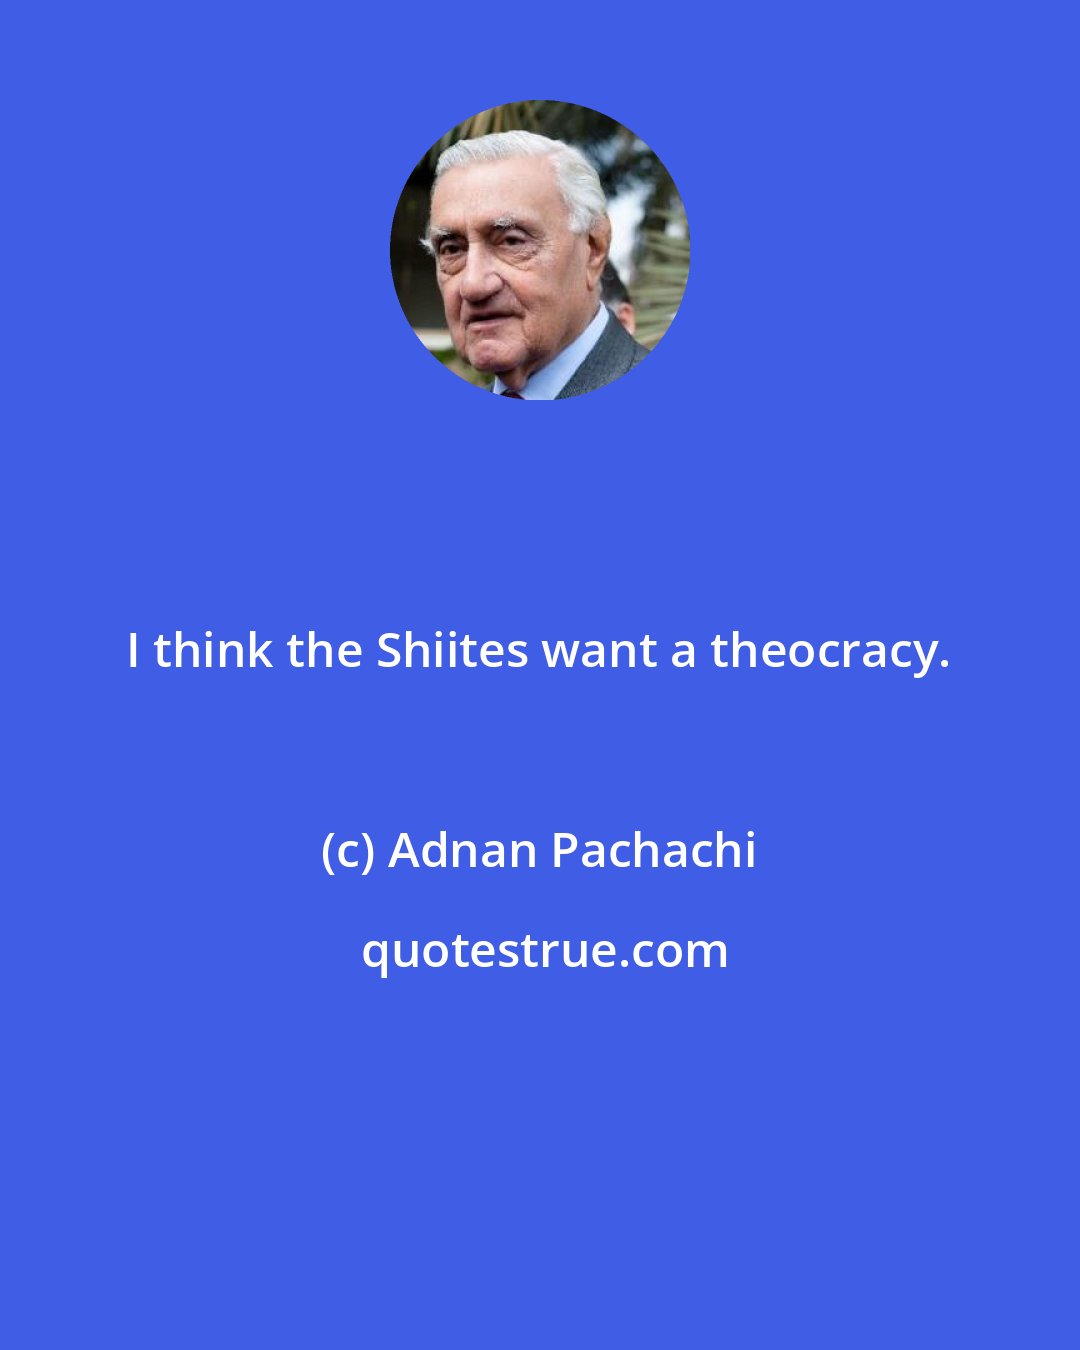 Adnan Pachachi: I think the Shiites want a theocracy.